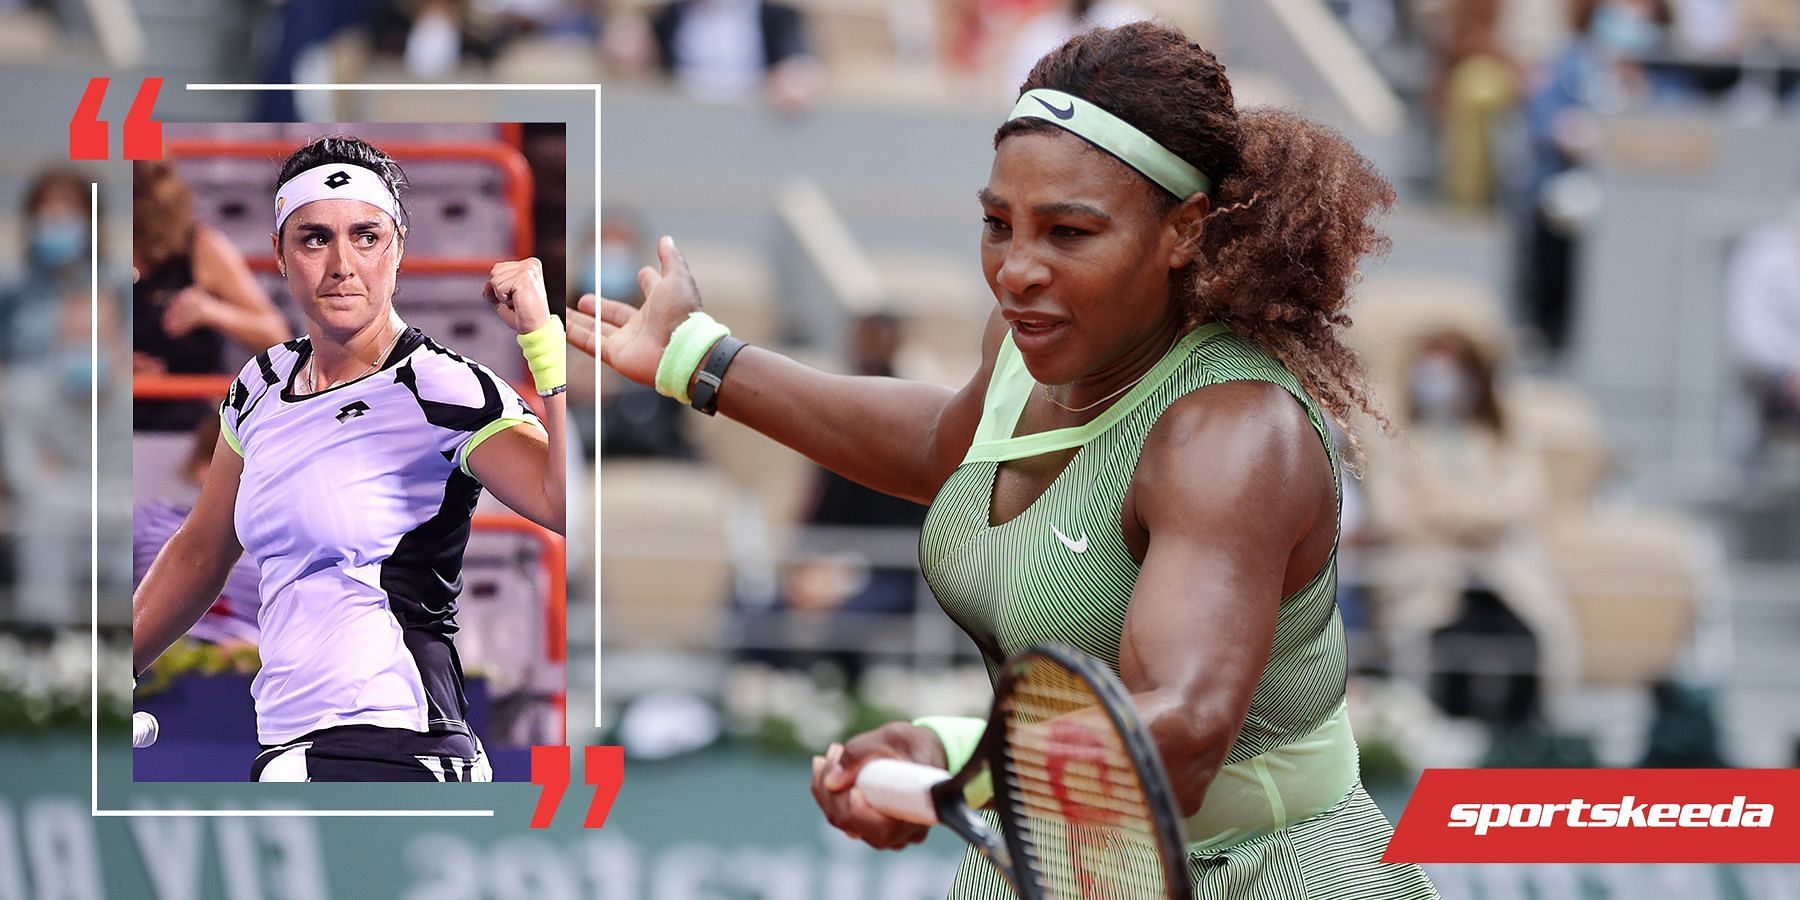 Serena Williams received a wildcard to participate in the 2022 Wimbledon Championships